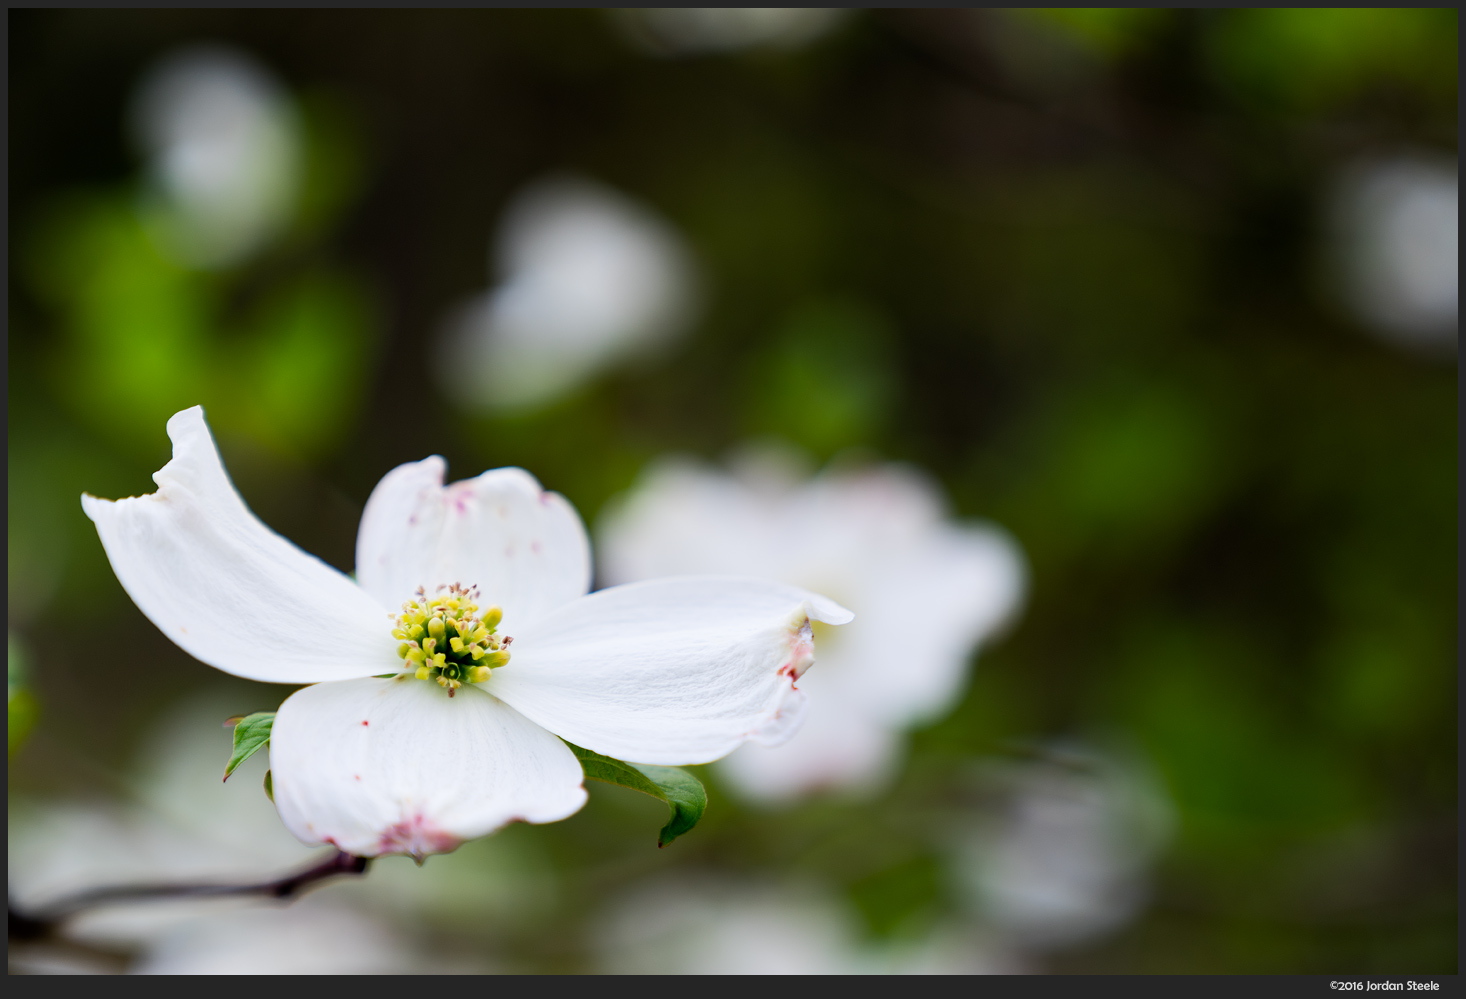 Blossom - Sony A7 II with Sony 24-70mm f/2.8 GM @ 70mm, f/2.8